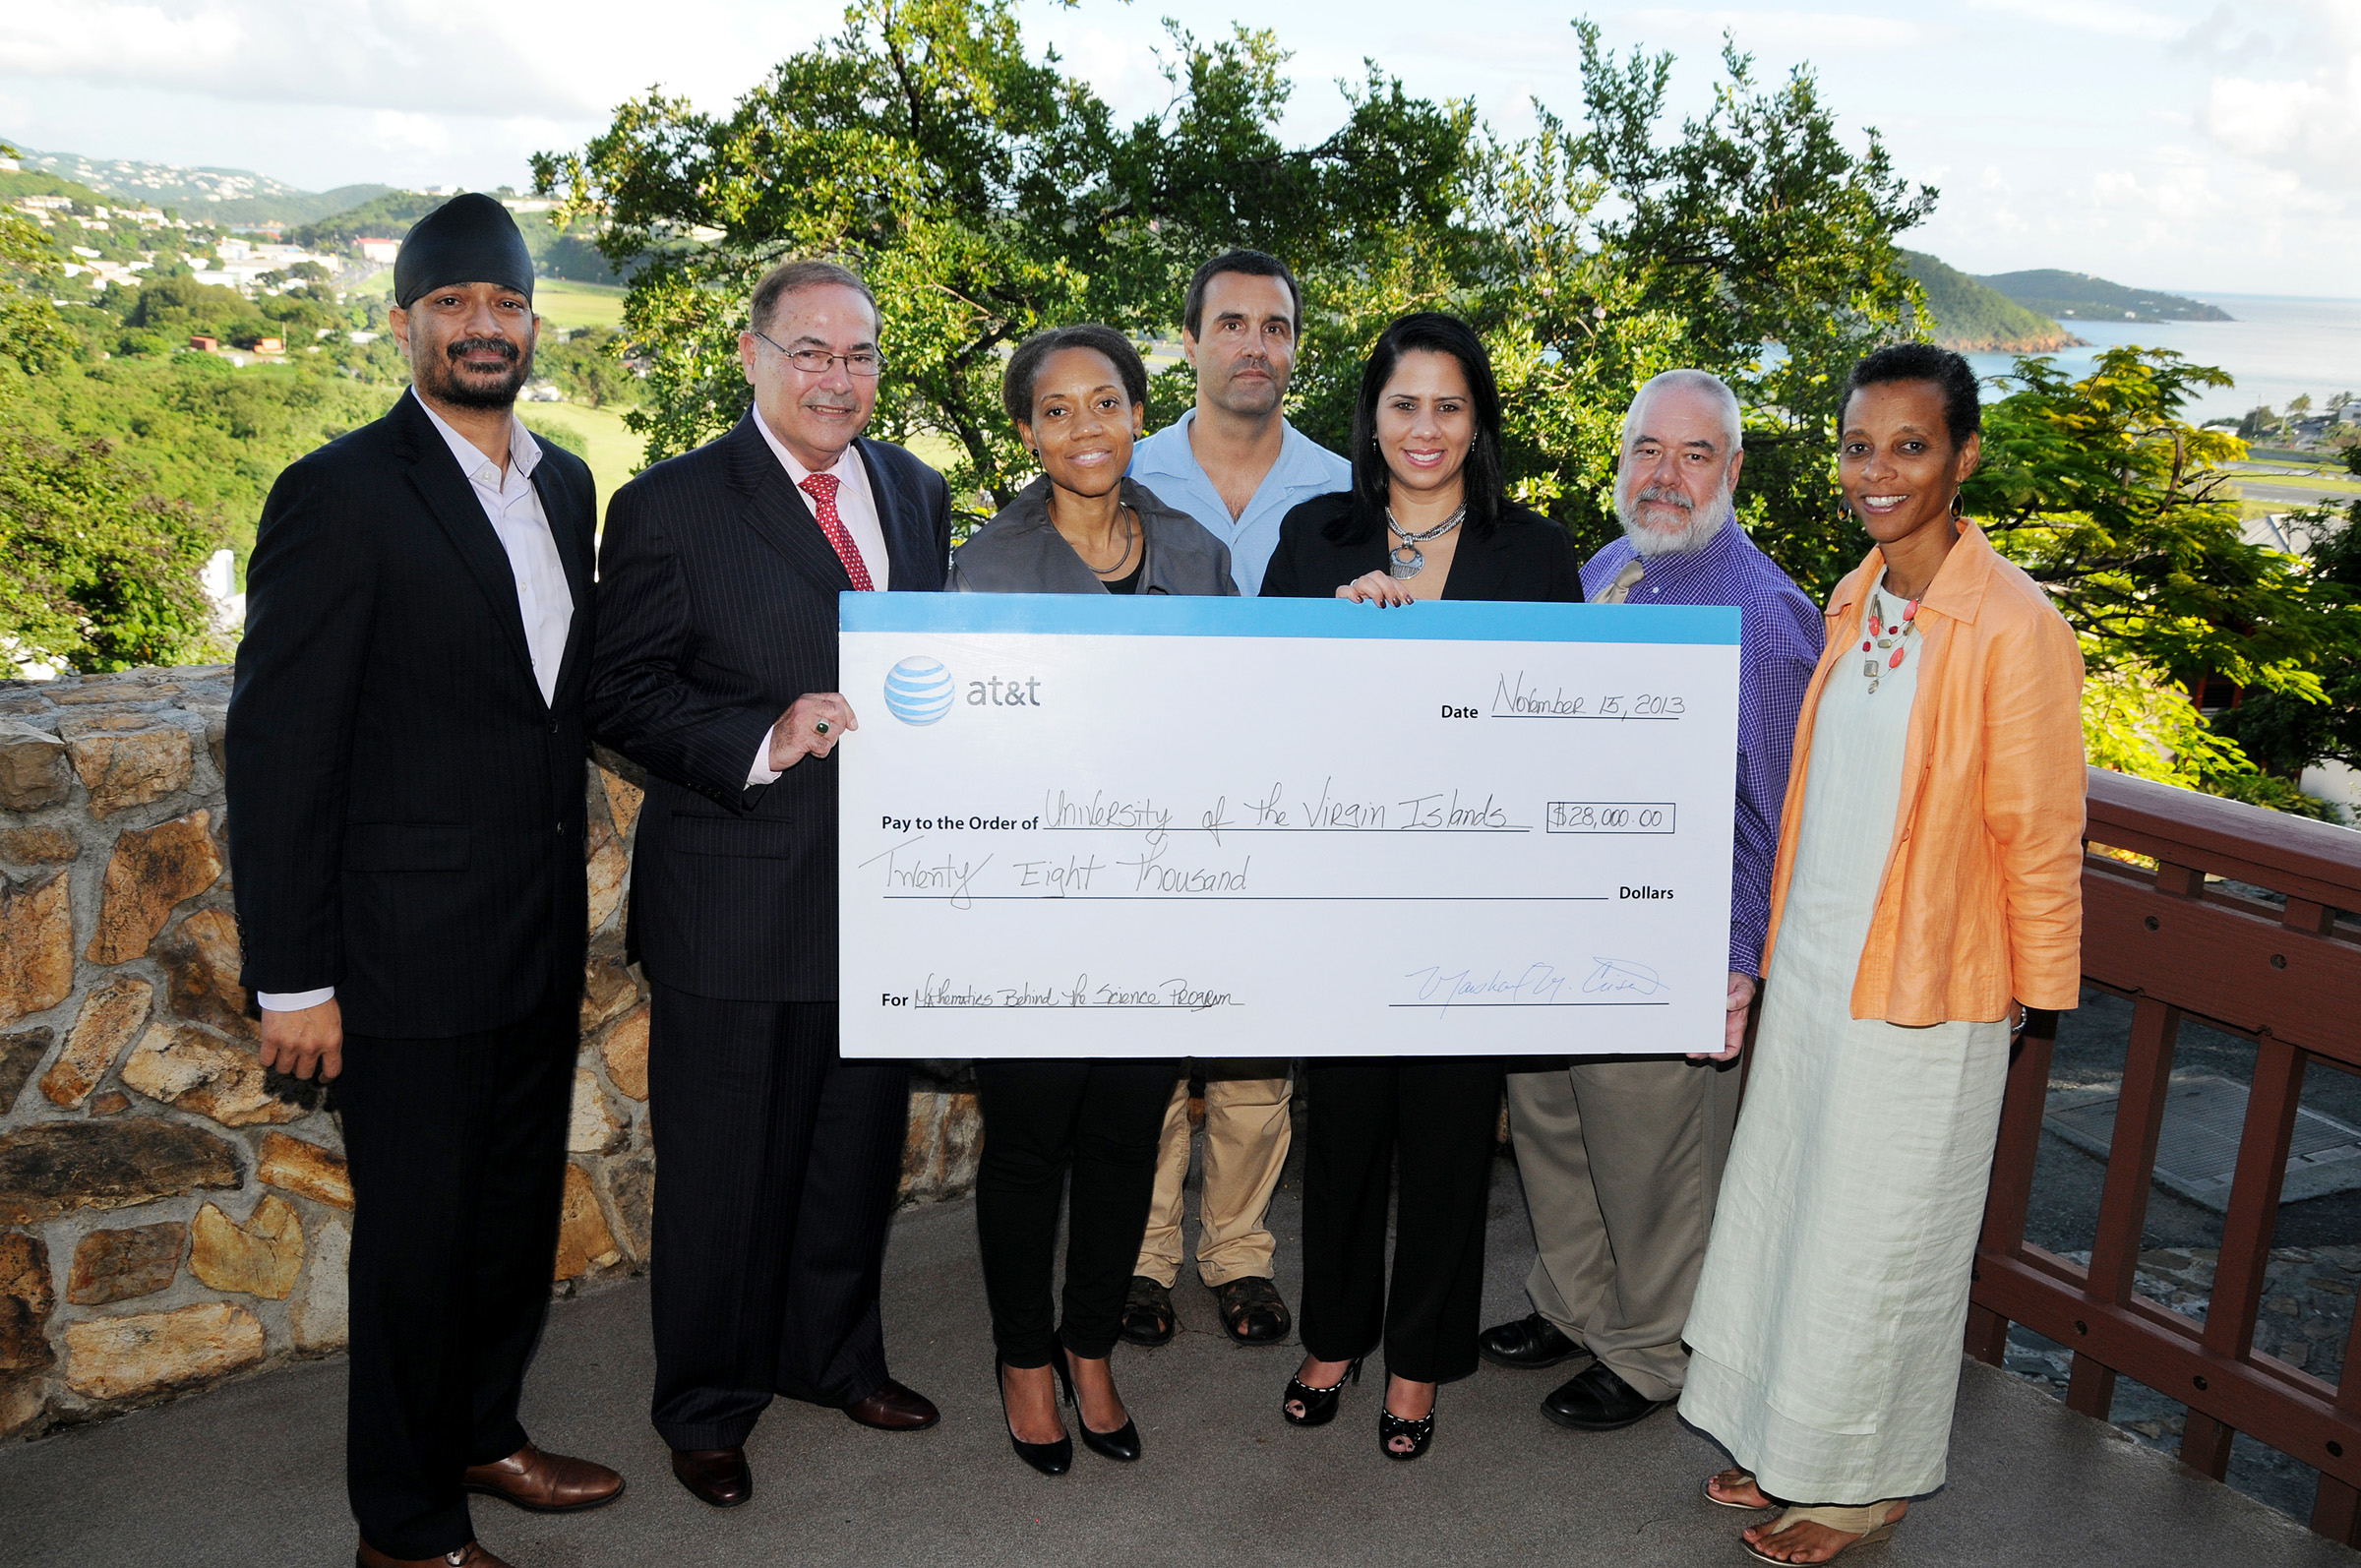 On hand for AT&T’s presentation of a $28,000 grant on UVI’s St. Thomas Campus were, from left, Attorney Ravi Nagi of the BoltNagi law firm, which represents AT&T, Regional Vice President for AT&T Puerto Rico and the USVI Ray Flores, UVI Vice President for Institutional Advancement Dionne Jackson, Program Director Dr. Robert Stolz, AT&T USVI Retail Store Manager Catherine Kling, UVI Director of Corporate, Foundation and Government Relations Richard Cleaver, and UVI Interim Provost Dr. Camille McKayle.